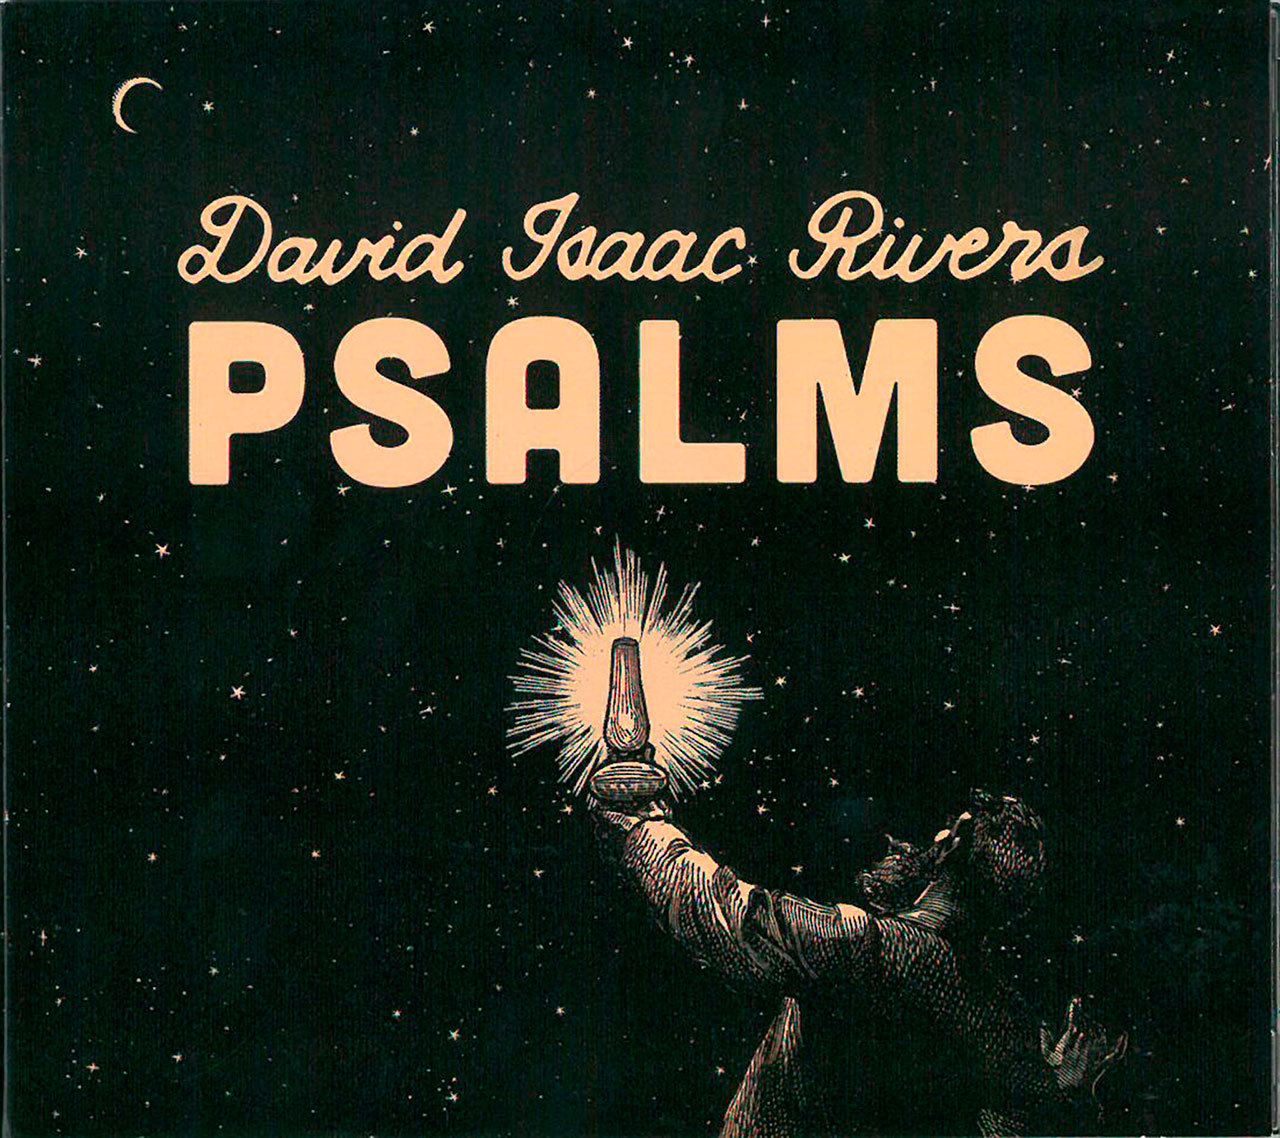 David Isaac Rivers’ “Psalms” can be purchased at the release party at 7 p.m. tonight in Calvary Chapel Sequim, 91 Boyce Road, or at The Good Book in Sequim, Port Book and News in Port Angeles.